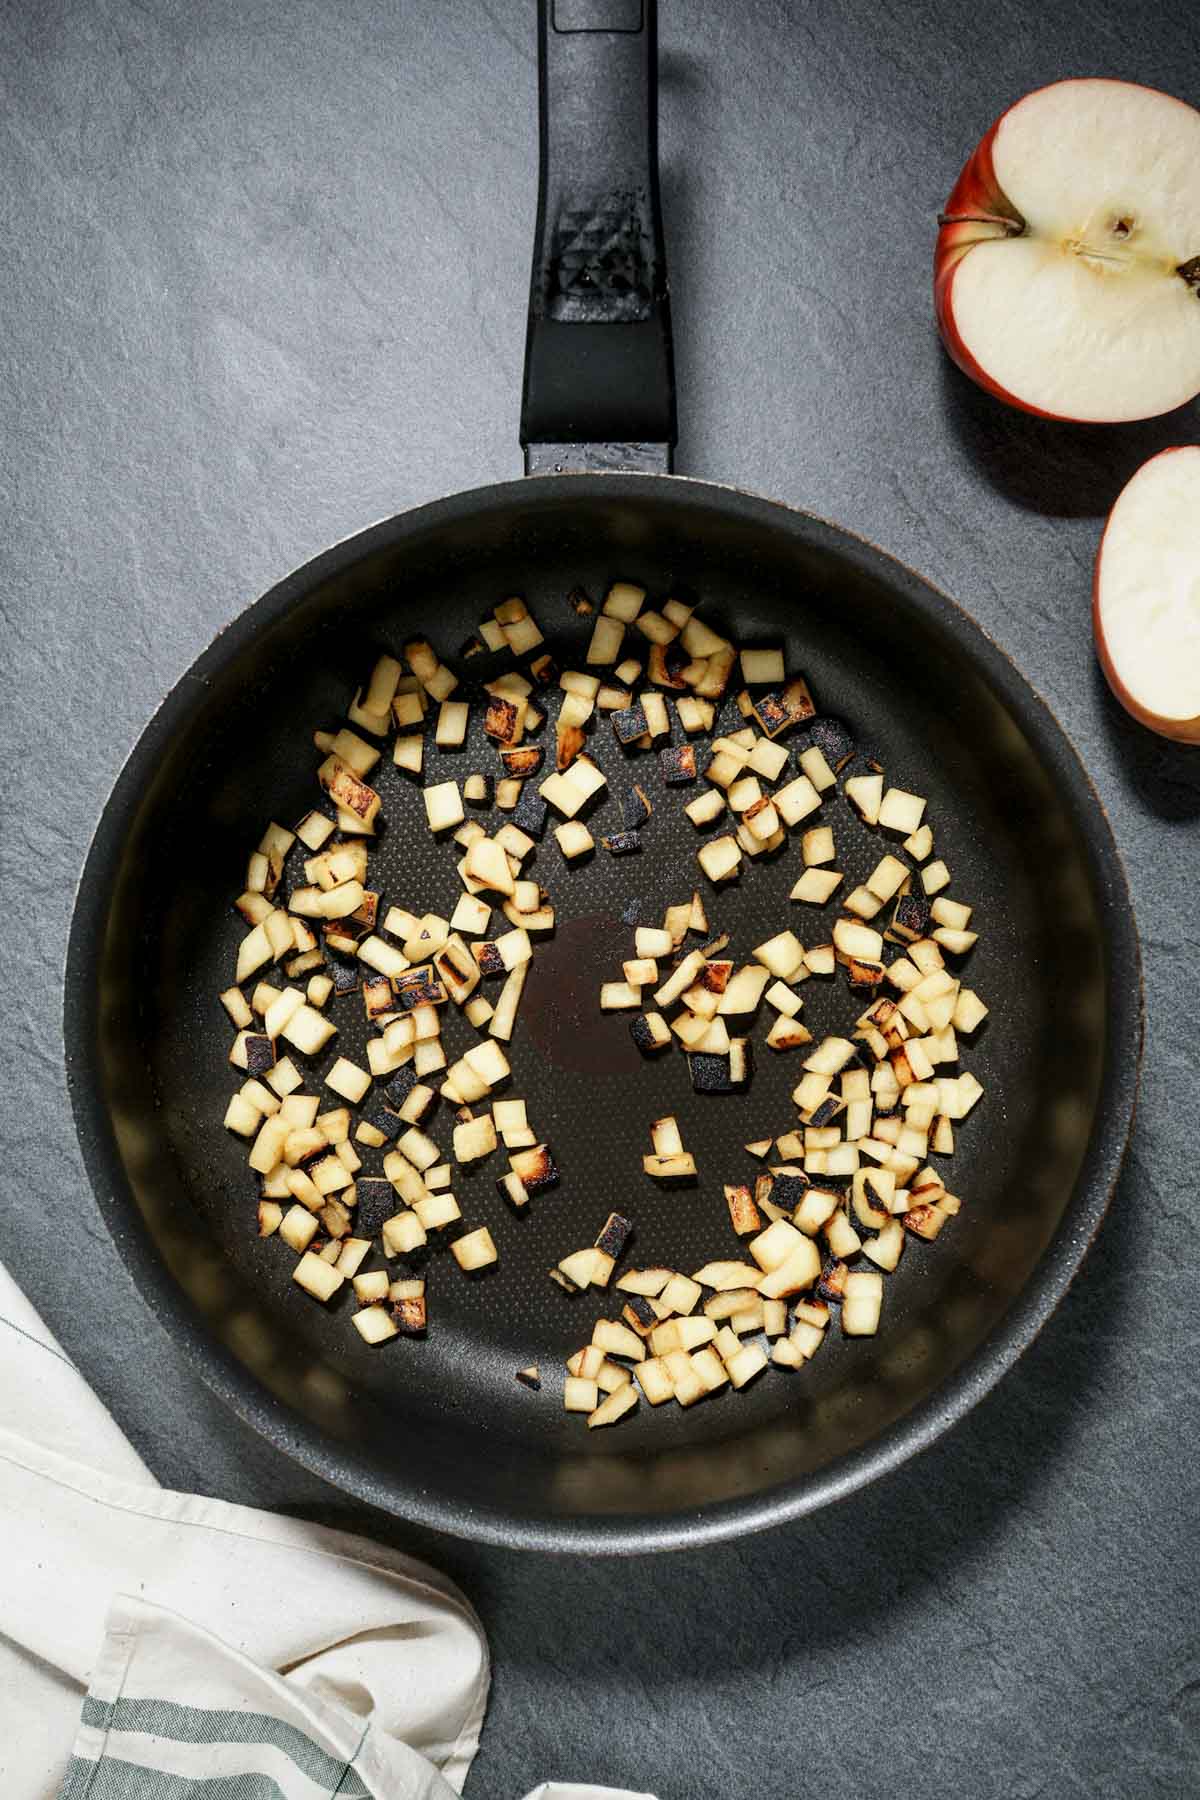 chopped apples begin sauteed in a skillet